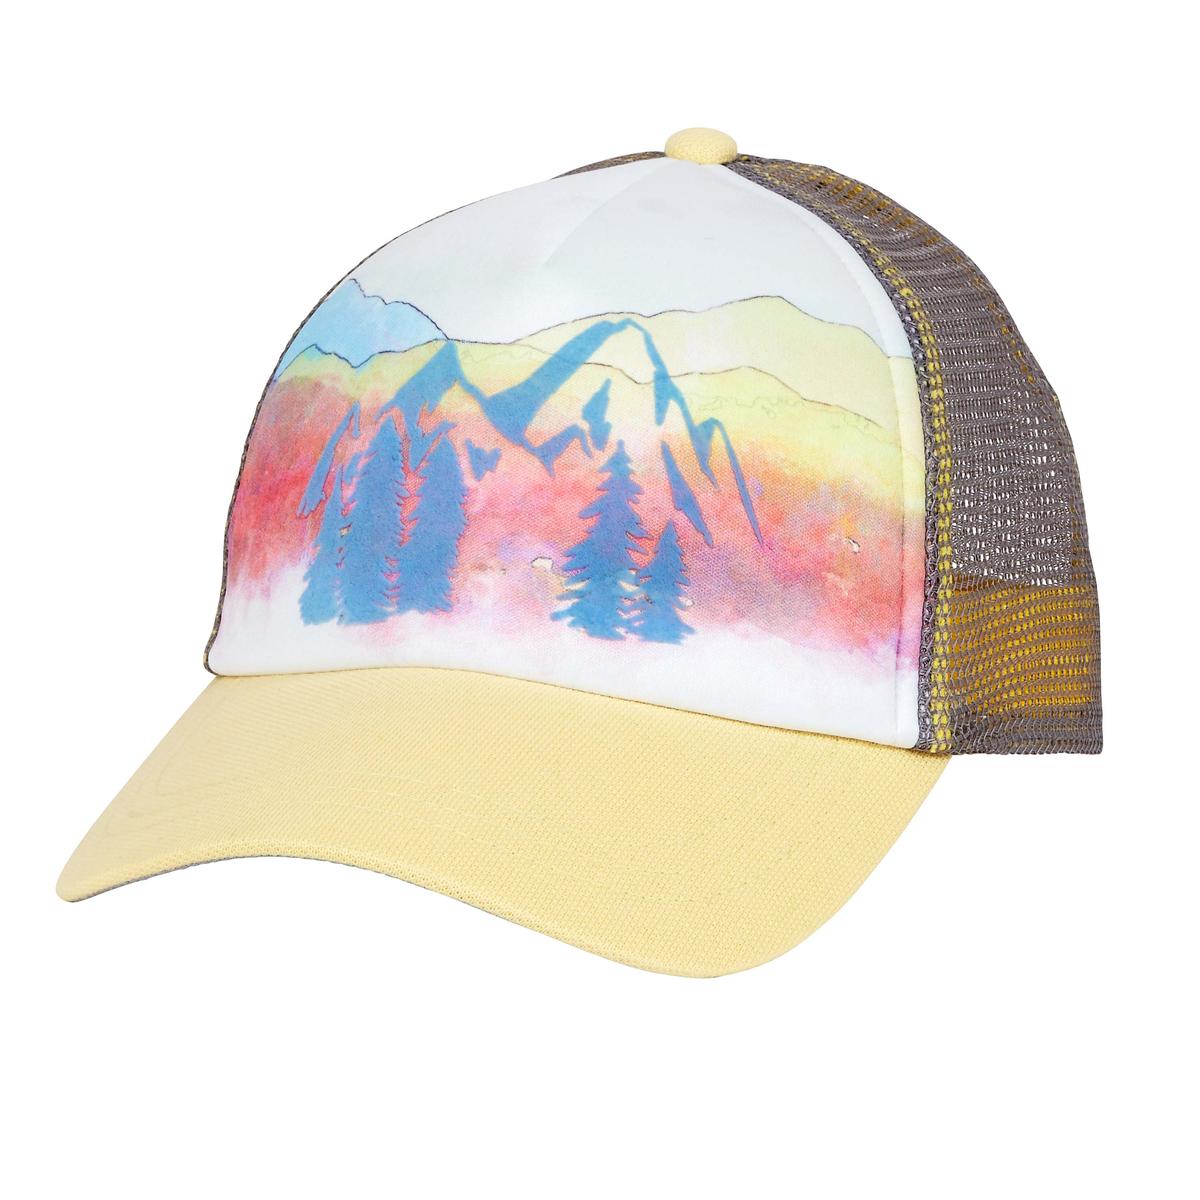 Great Outdoors Trucker / Color-Sunshine